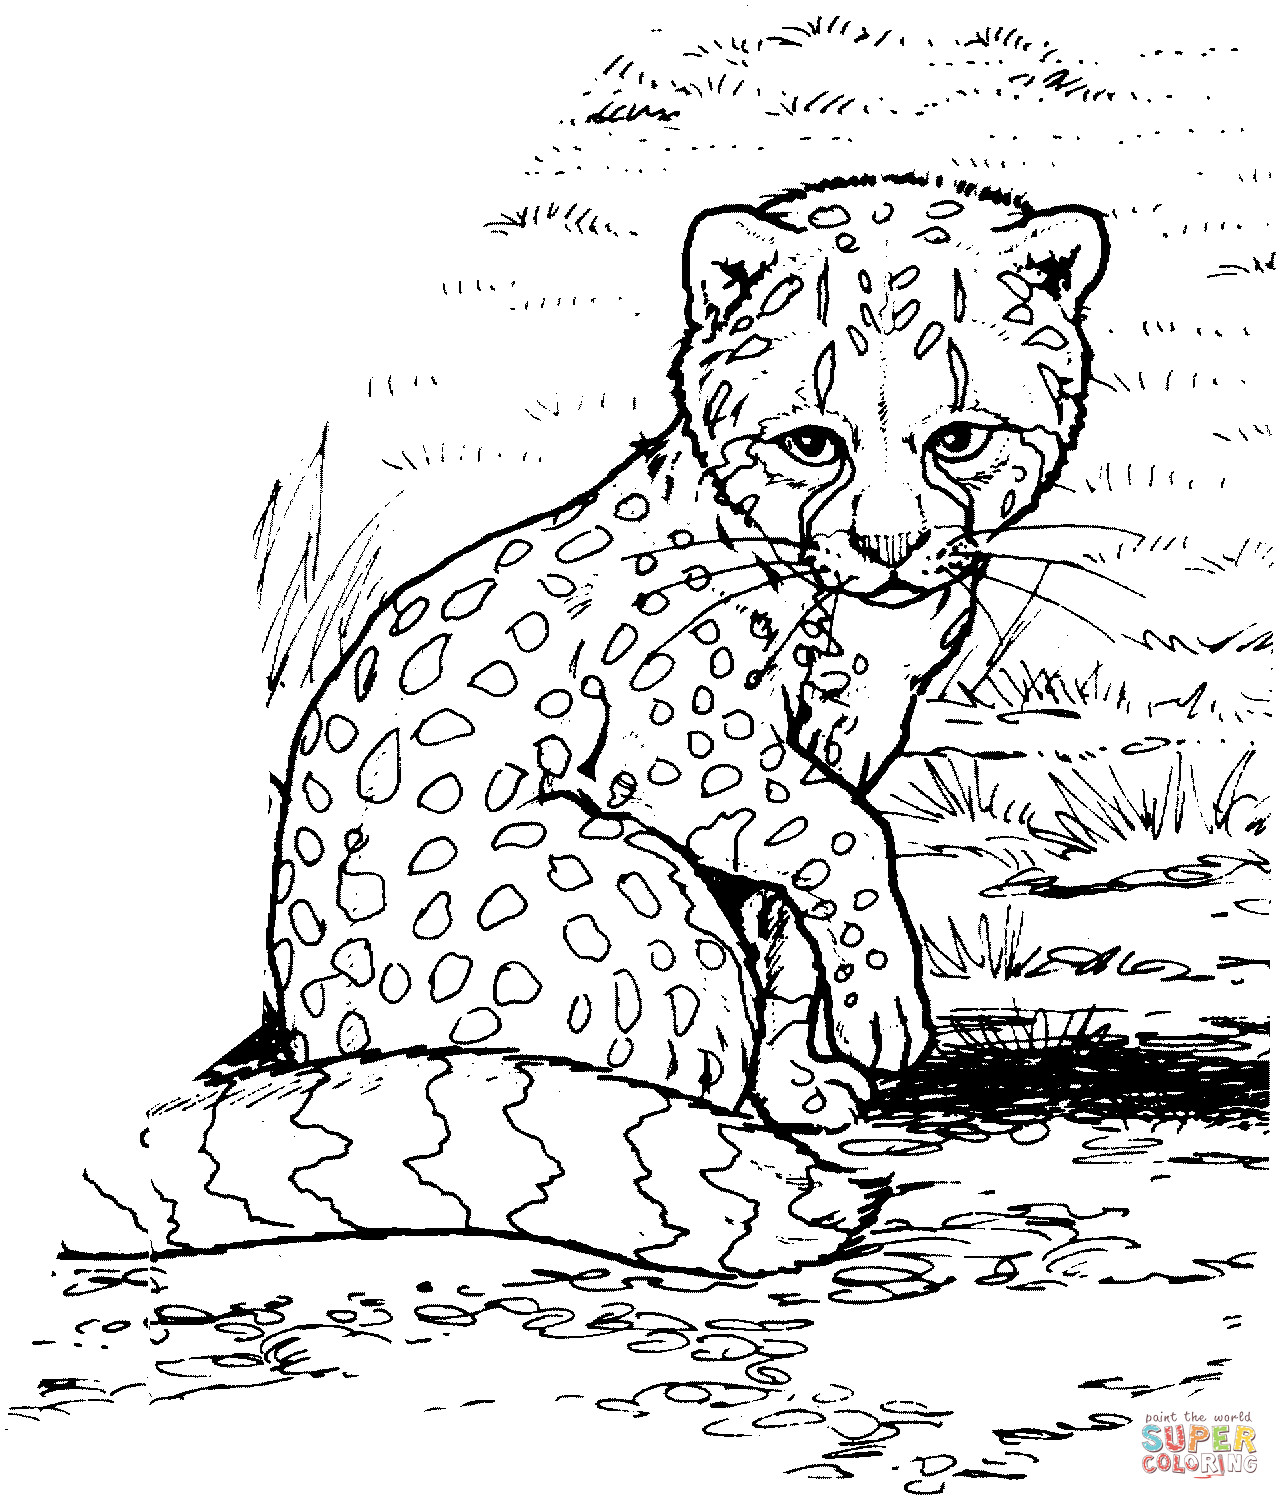 Best 21 Baby Cheetah Coloring Pages - Home, Family, Style and Art Ideas